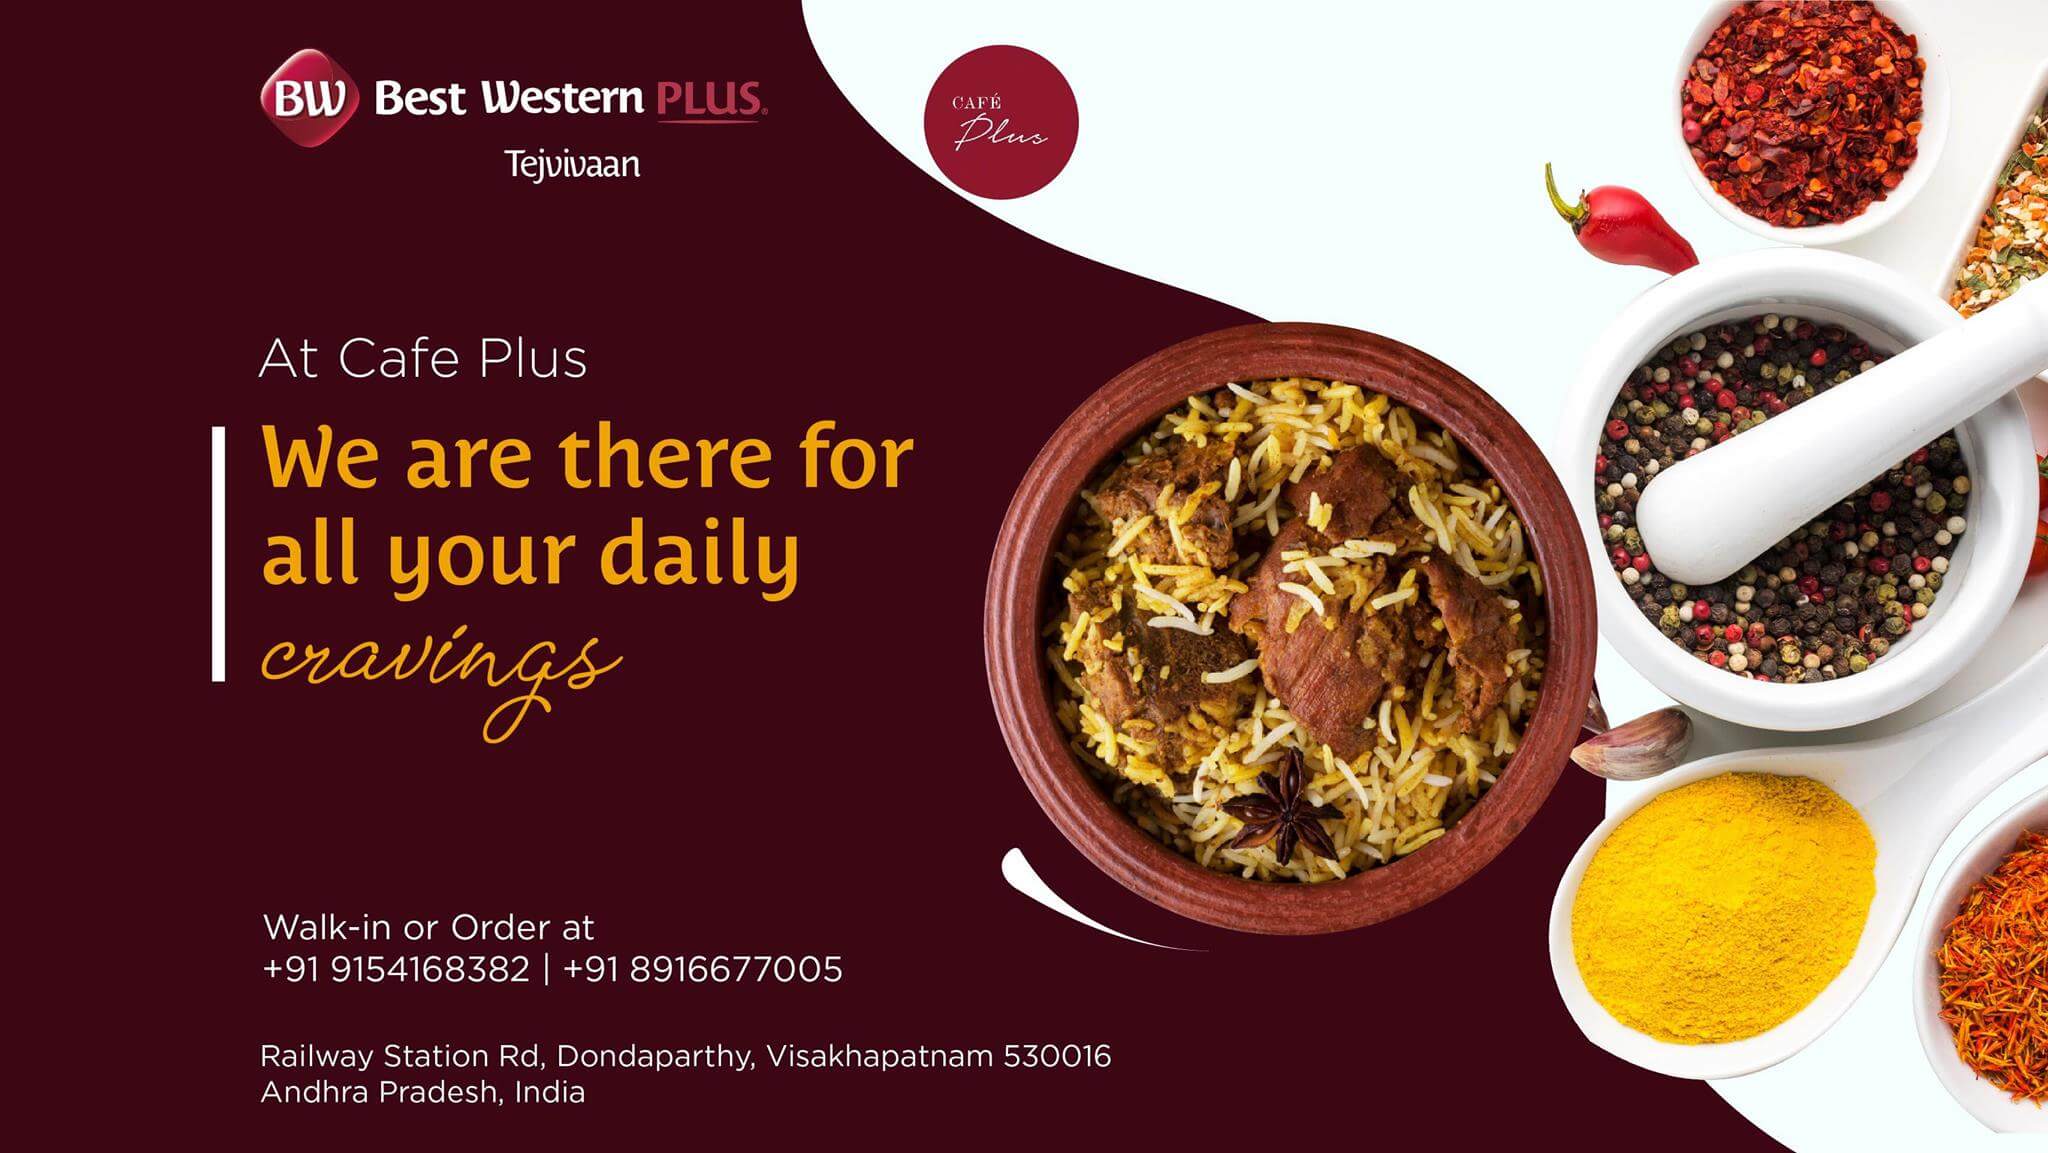 We Are There for All Your Daily Carvings - Best Western Plus Hotel Tejvivaan Cafe Plus